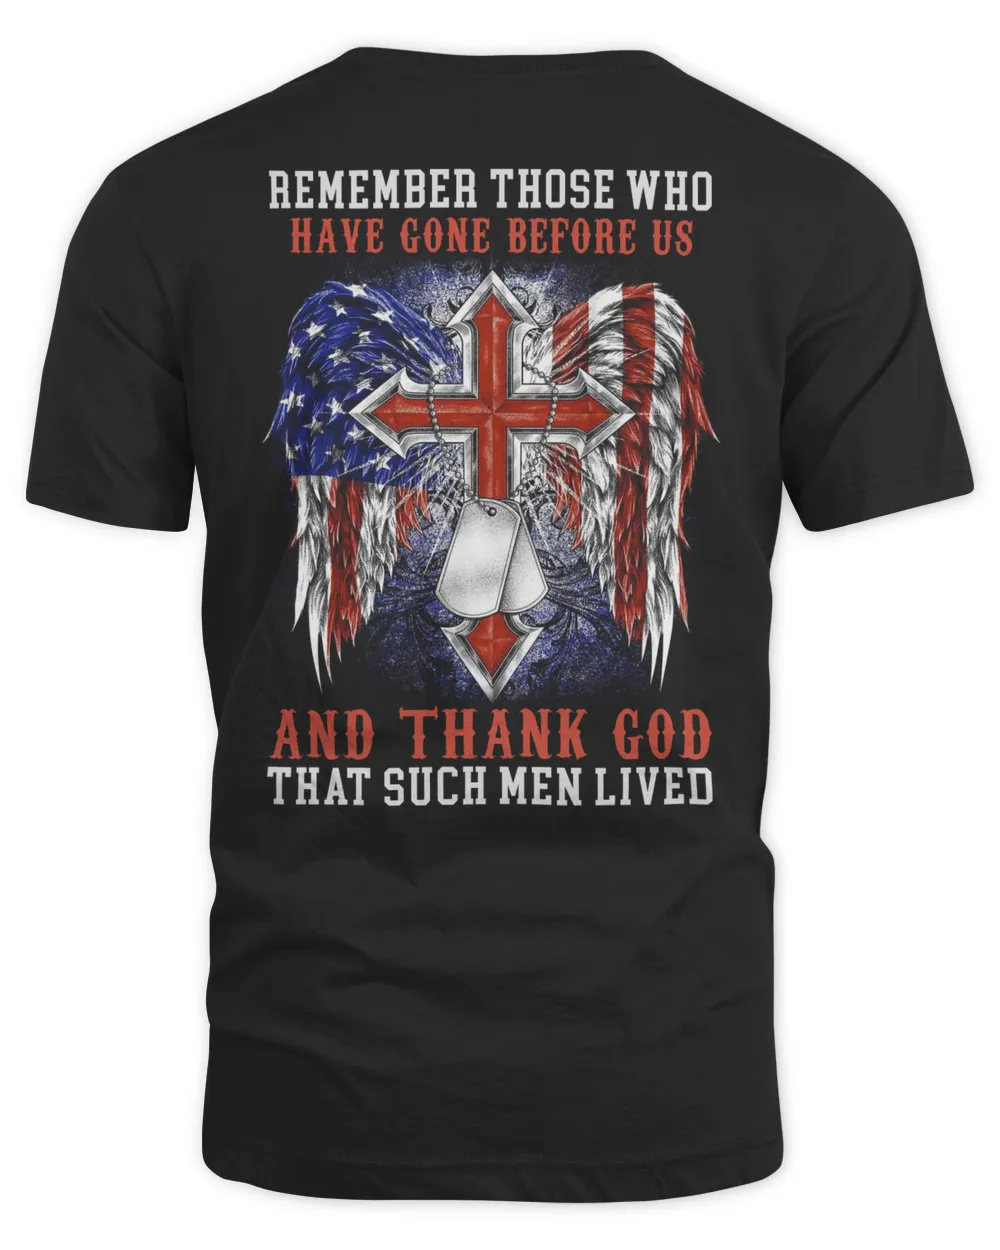 Remember those who have gone before us and thankgod that such men lived